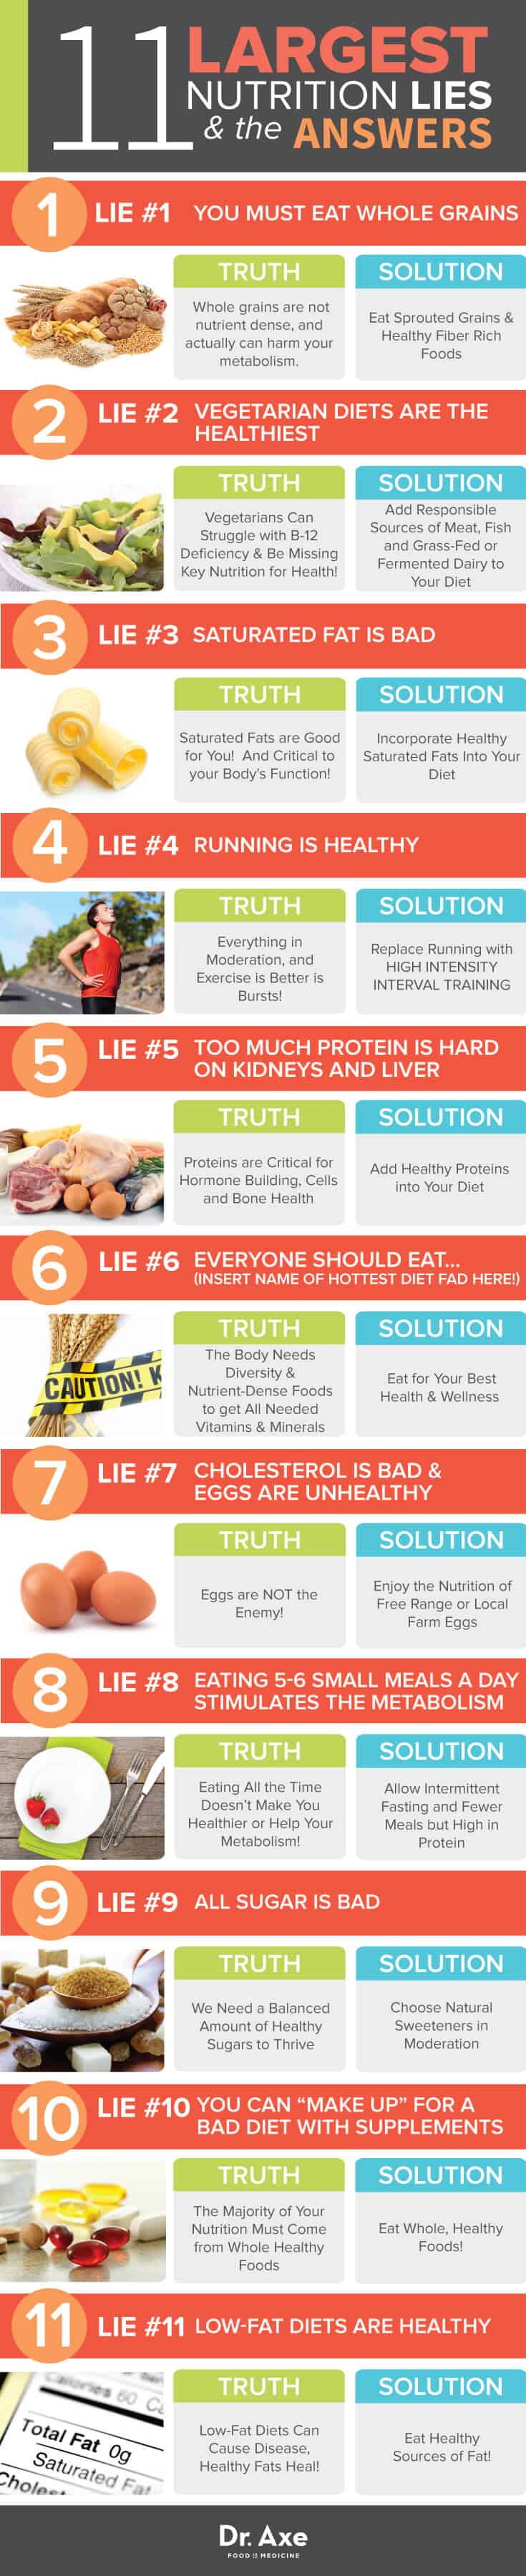 Nutrition Lies and Answers Infographic 